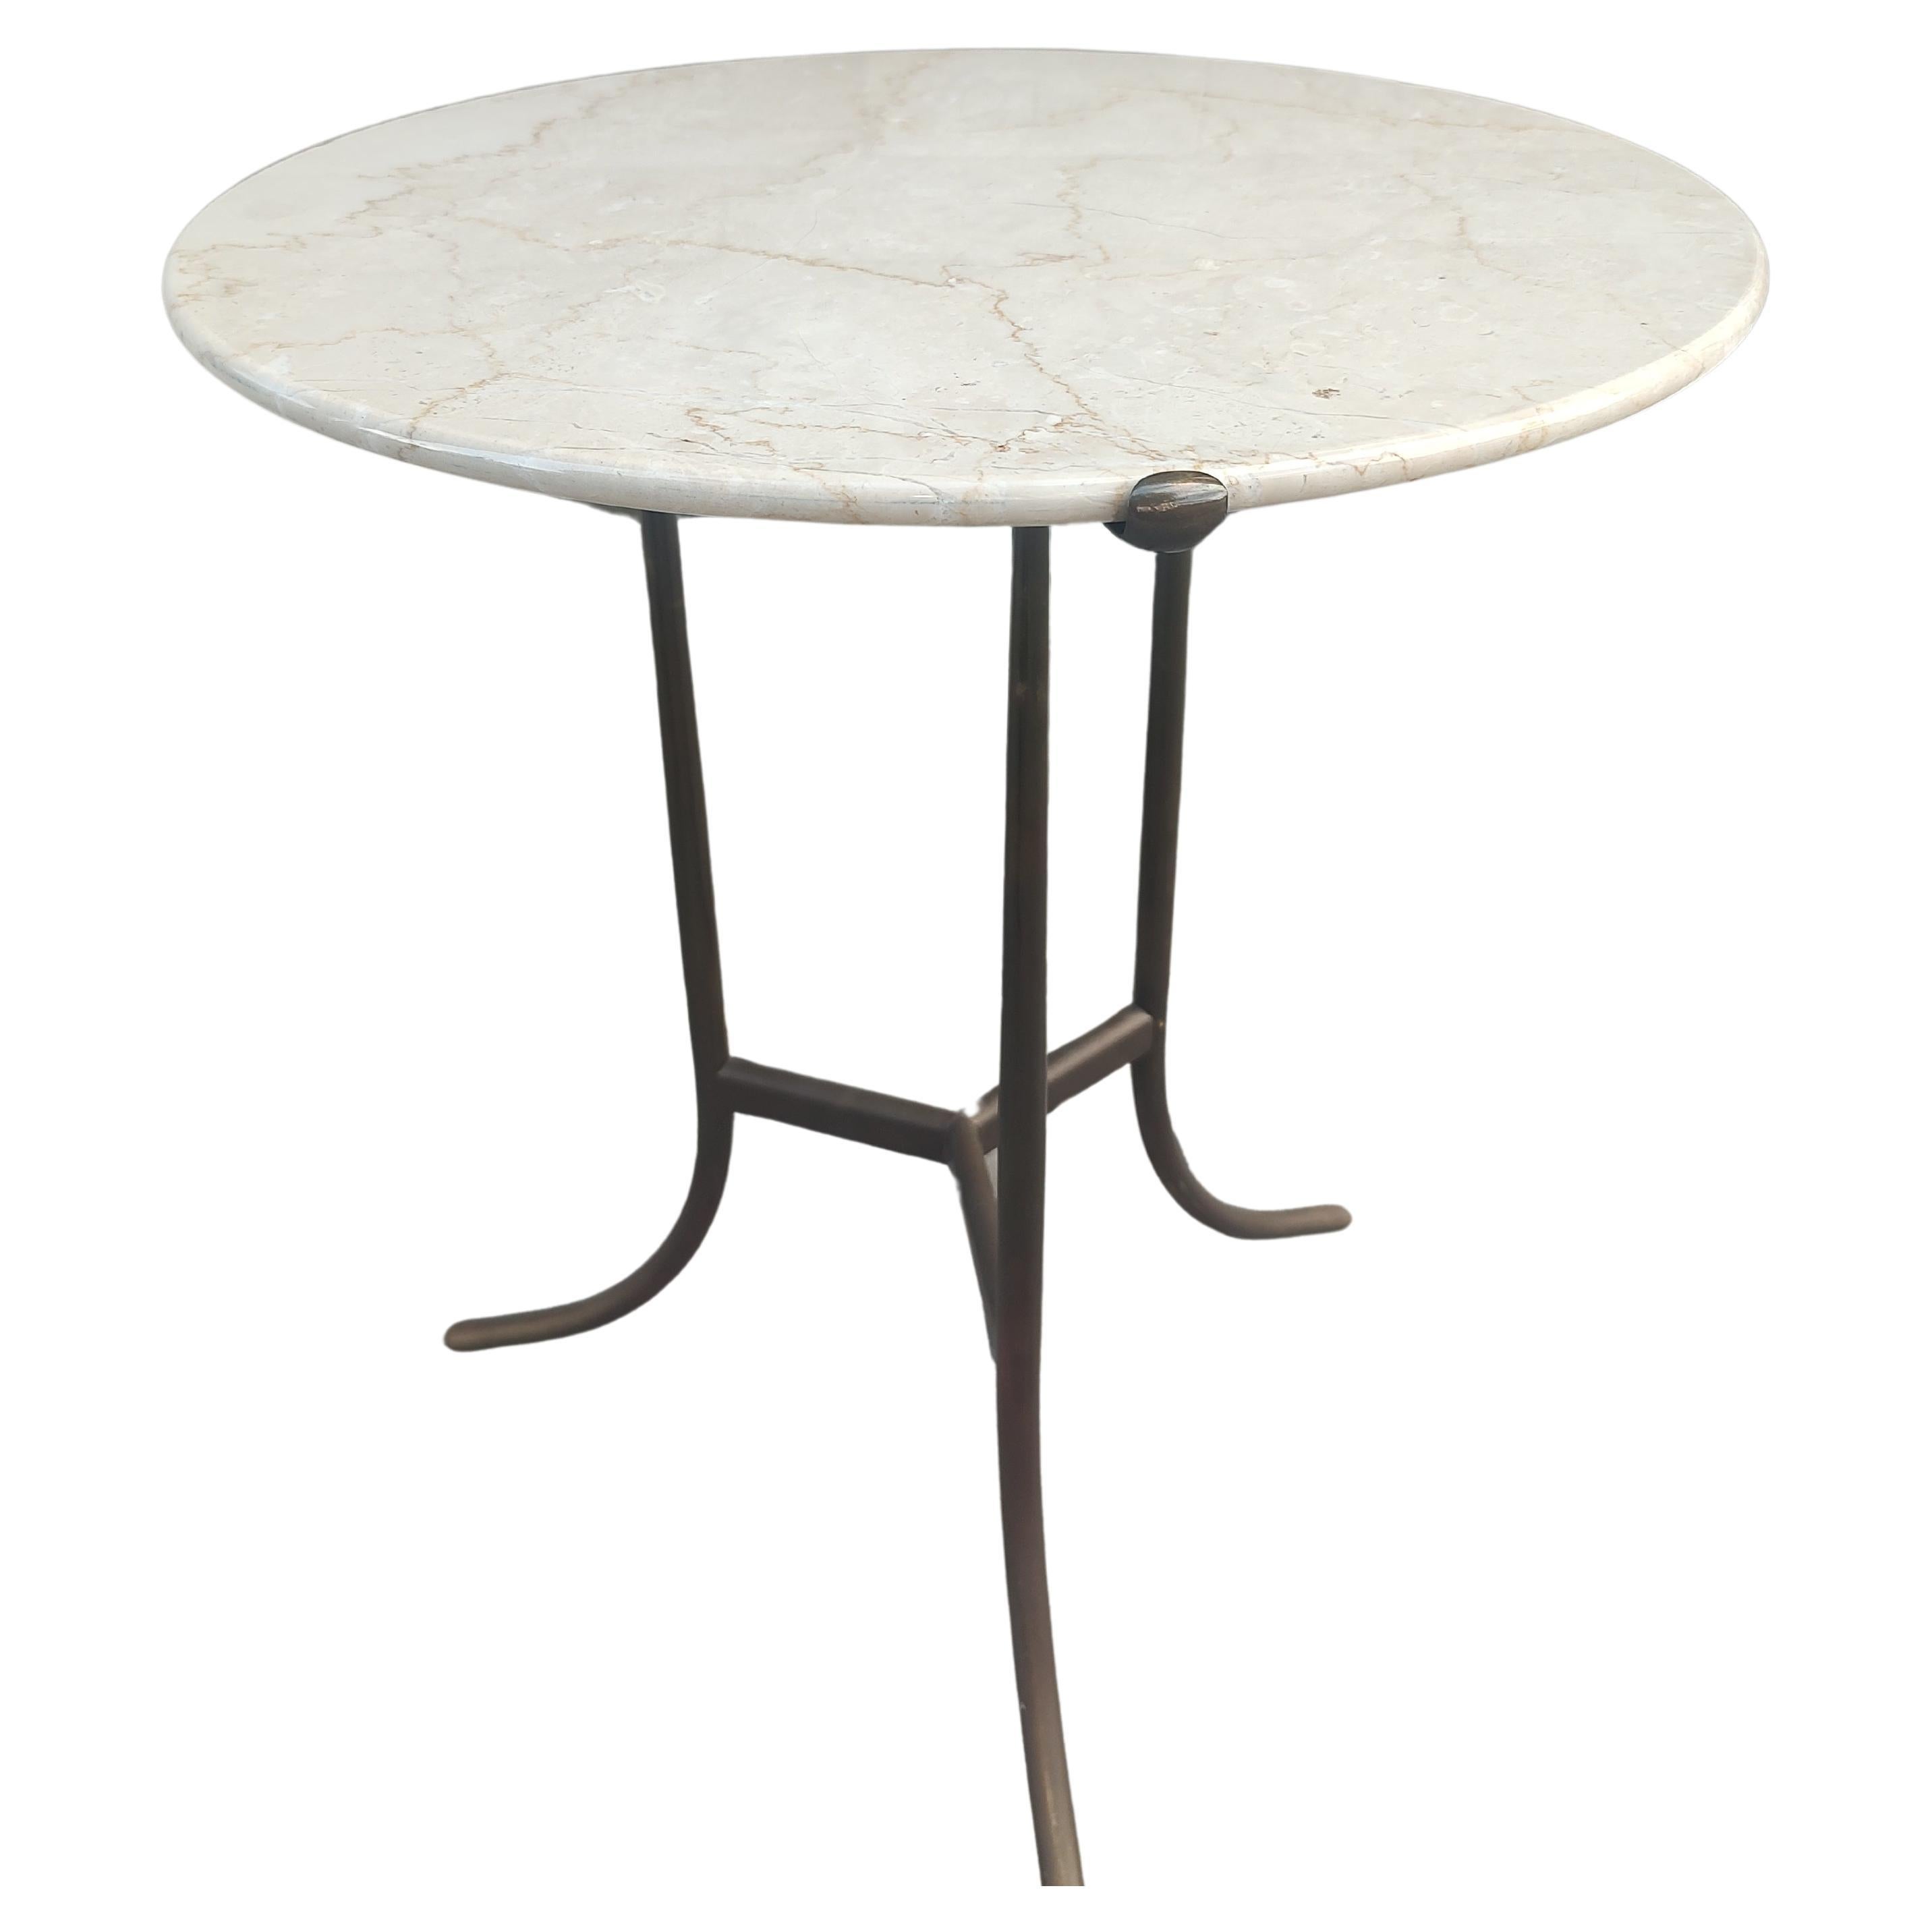 American Mid Century Modern Side Table w Polished Marble Top by Cedric Hartman  For Sale